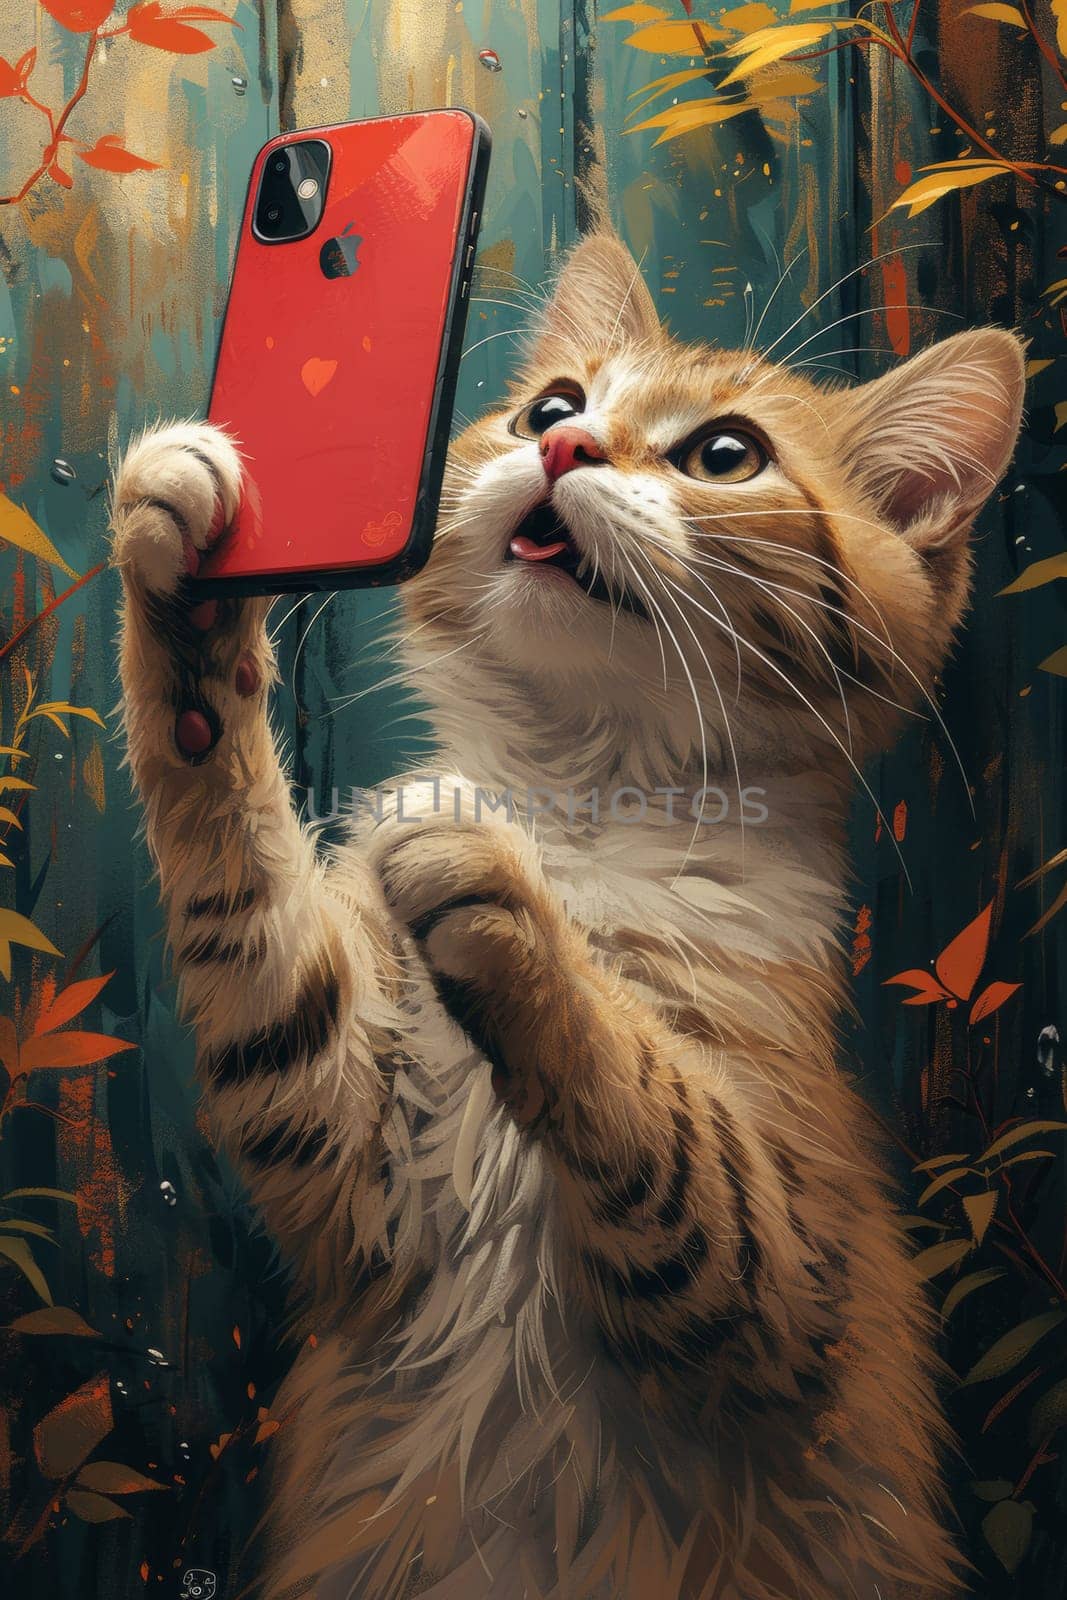 A cat holding up a red iphone in its paw